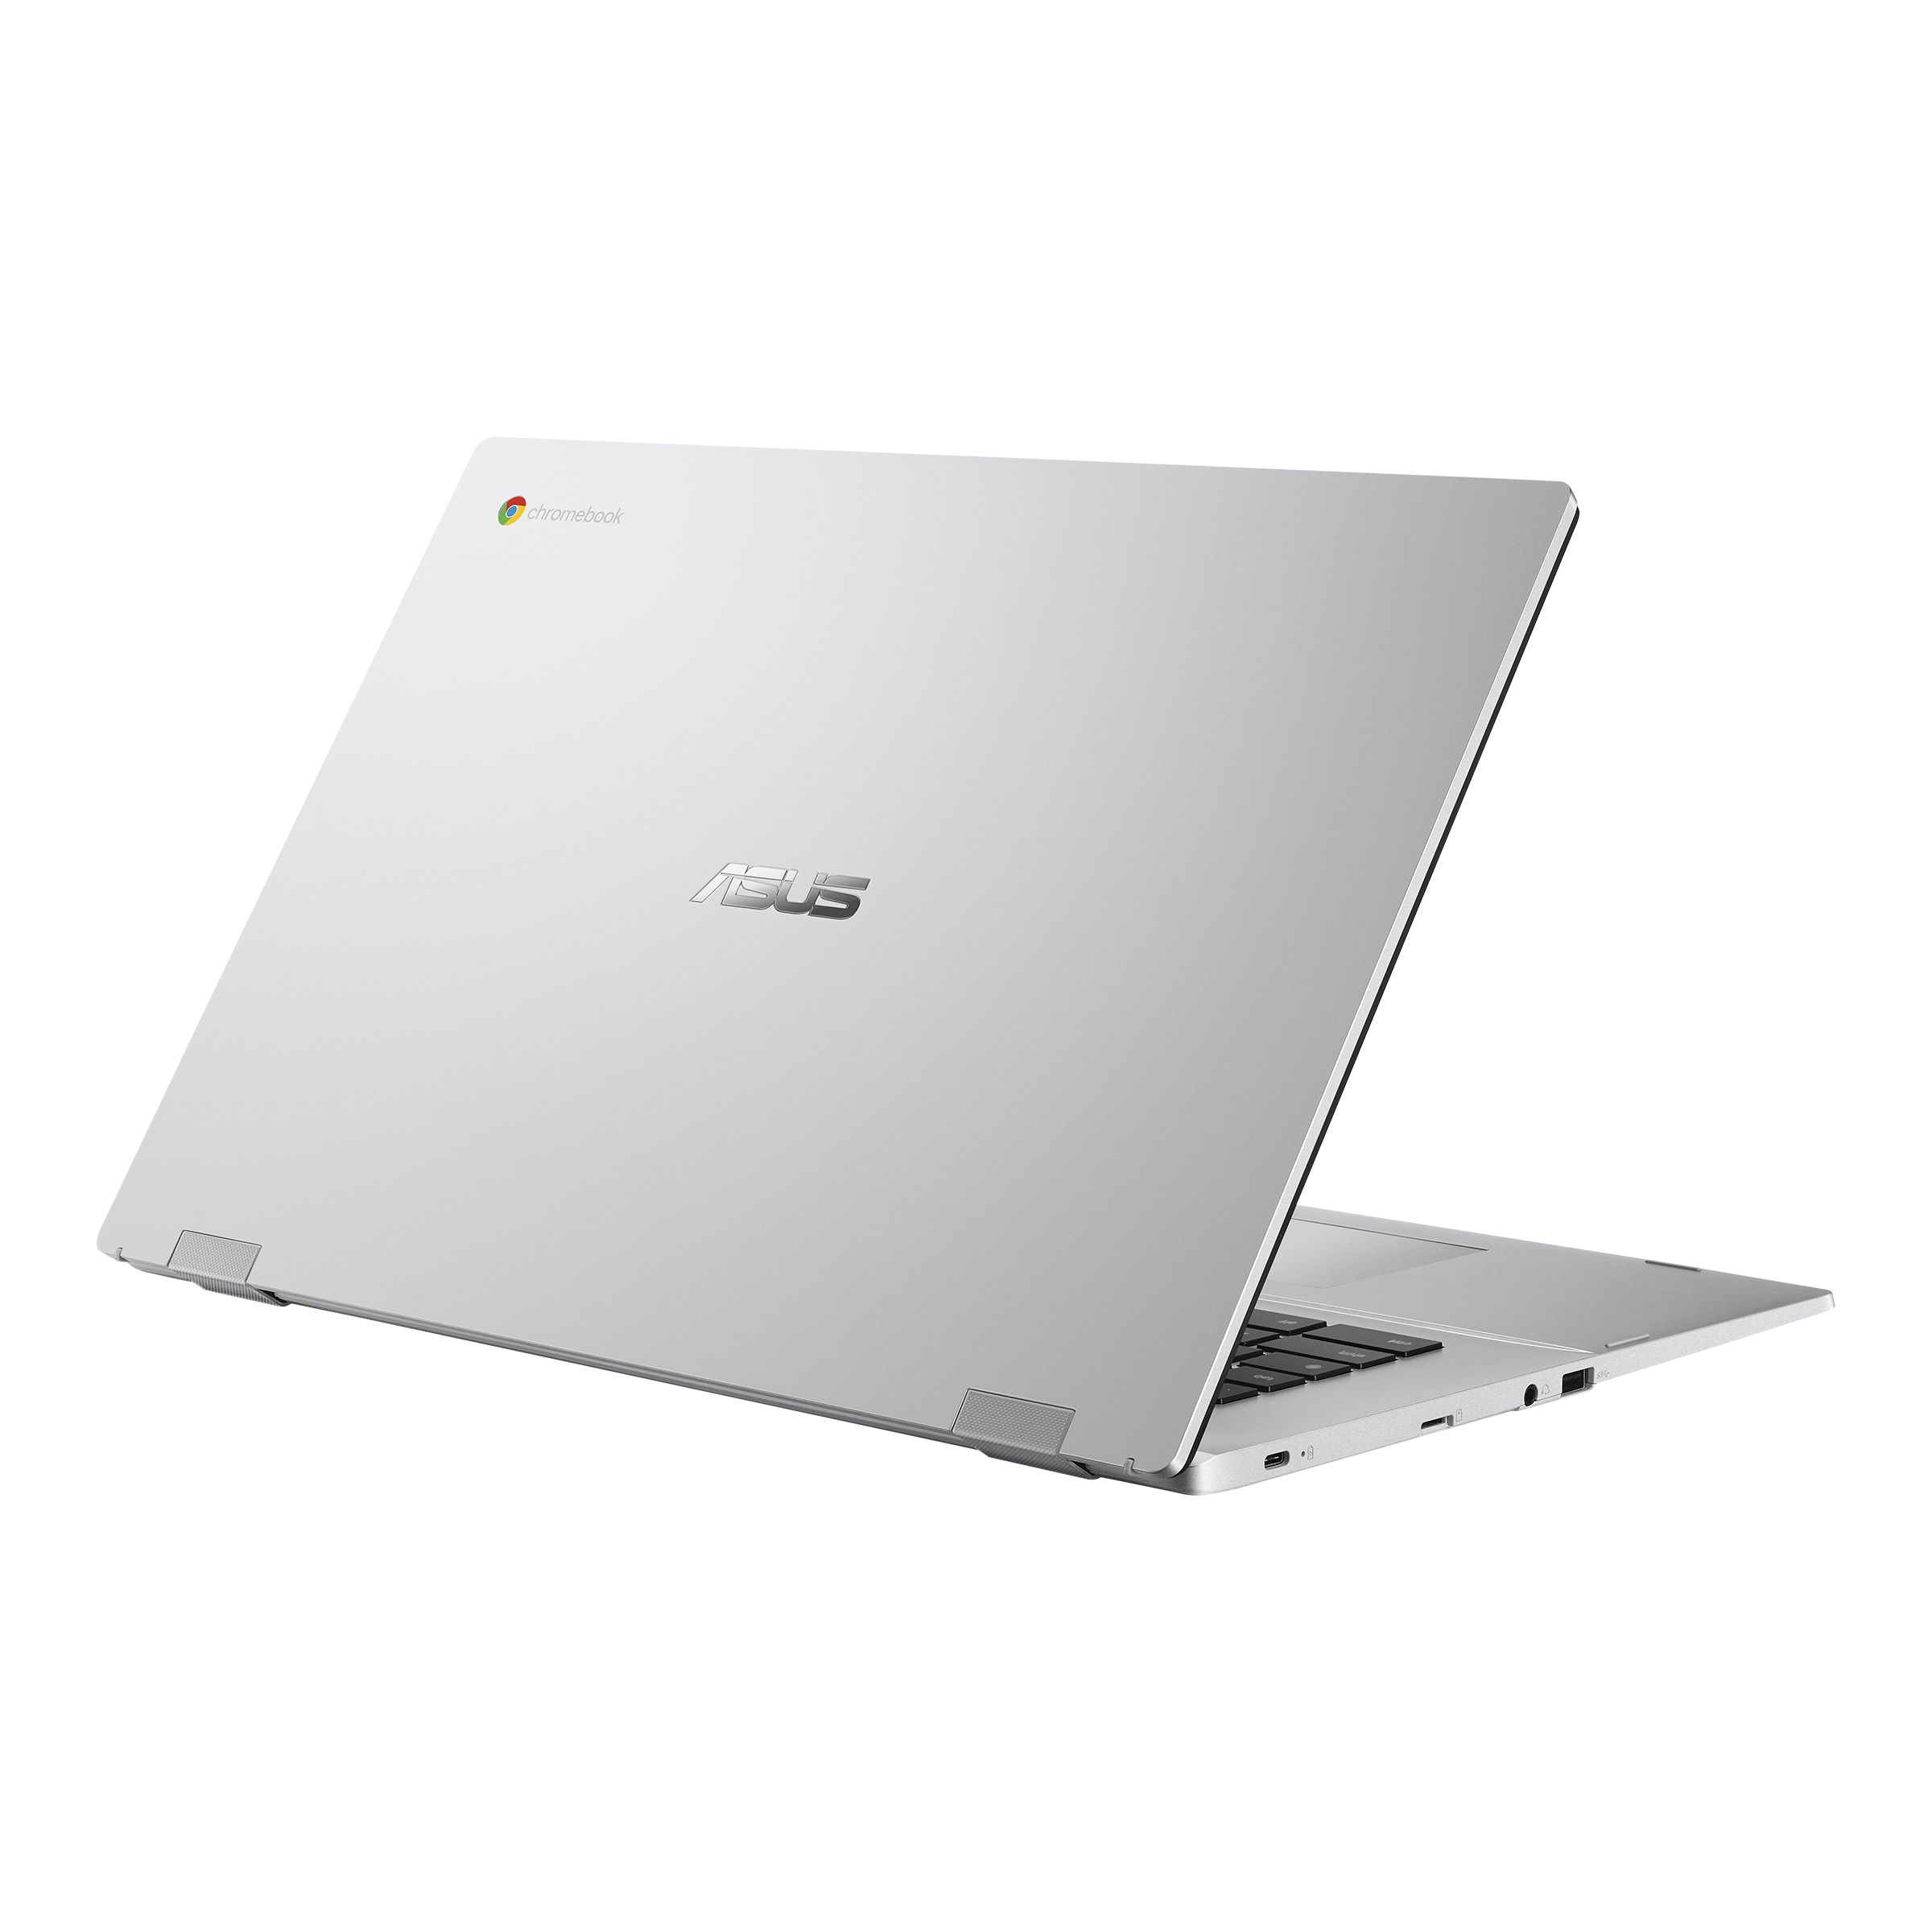 ASUS Chromebook CX1 (CX1700)｜Laptops For Home｜ASUS Canada